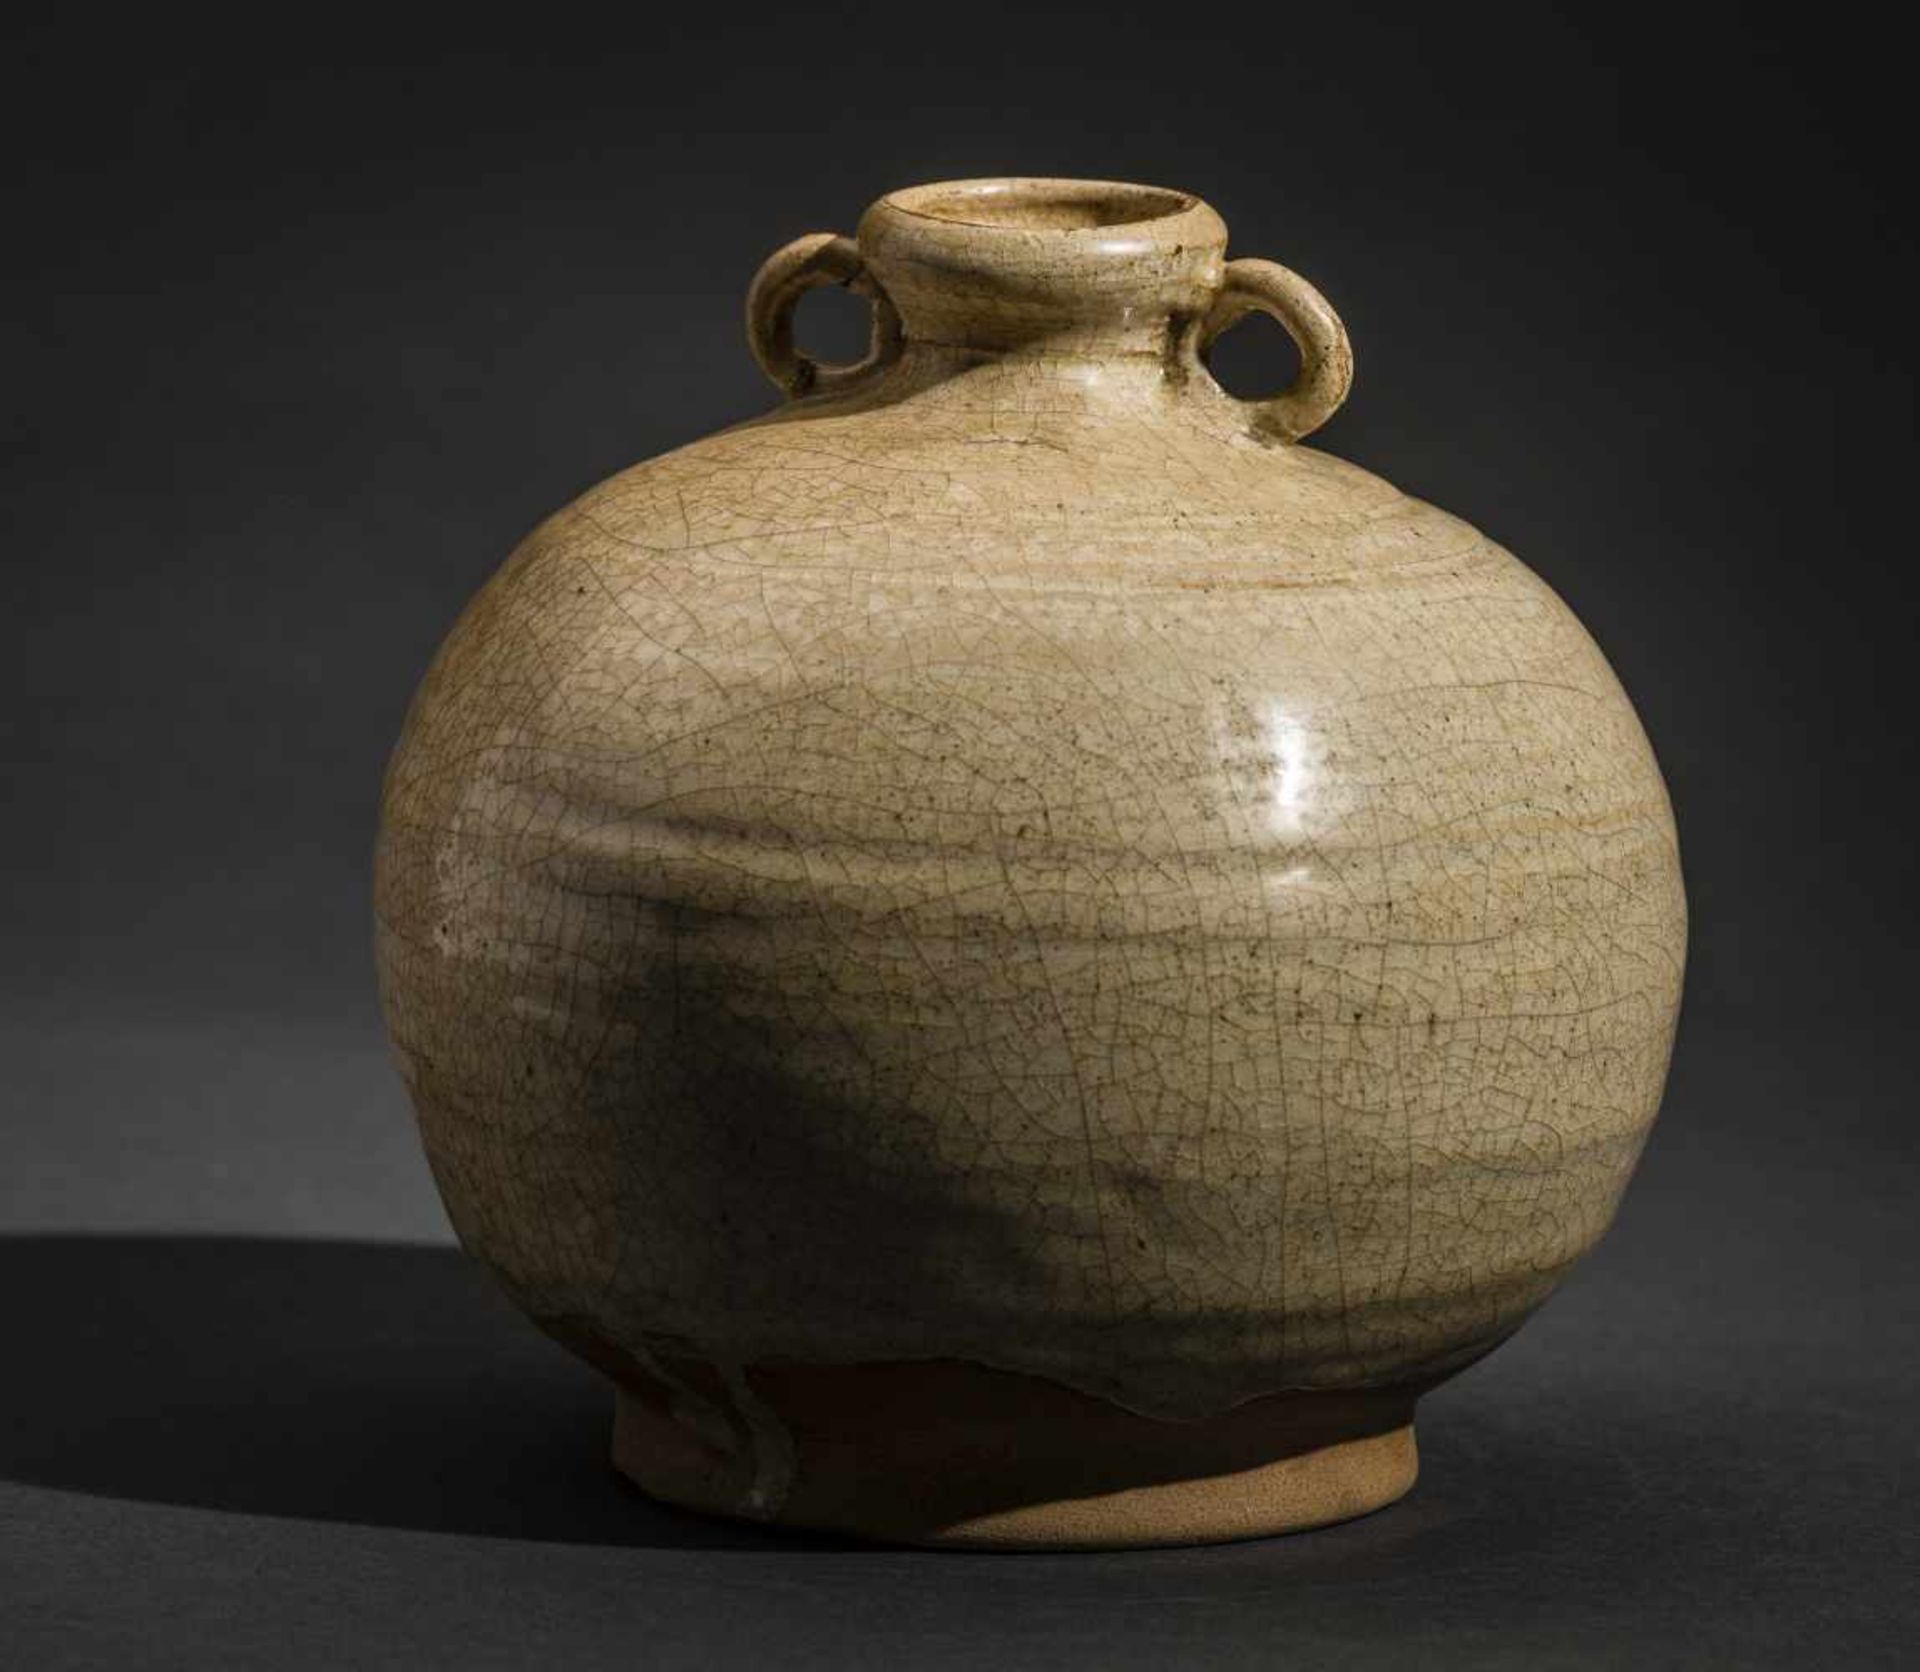 A SPHERICAL CONTAINER WITH LOOP HANDLESGlazed ceramicChina, Qing dynasty (1644-1911)Bright glaze - Bild 2 aus 4